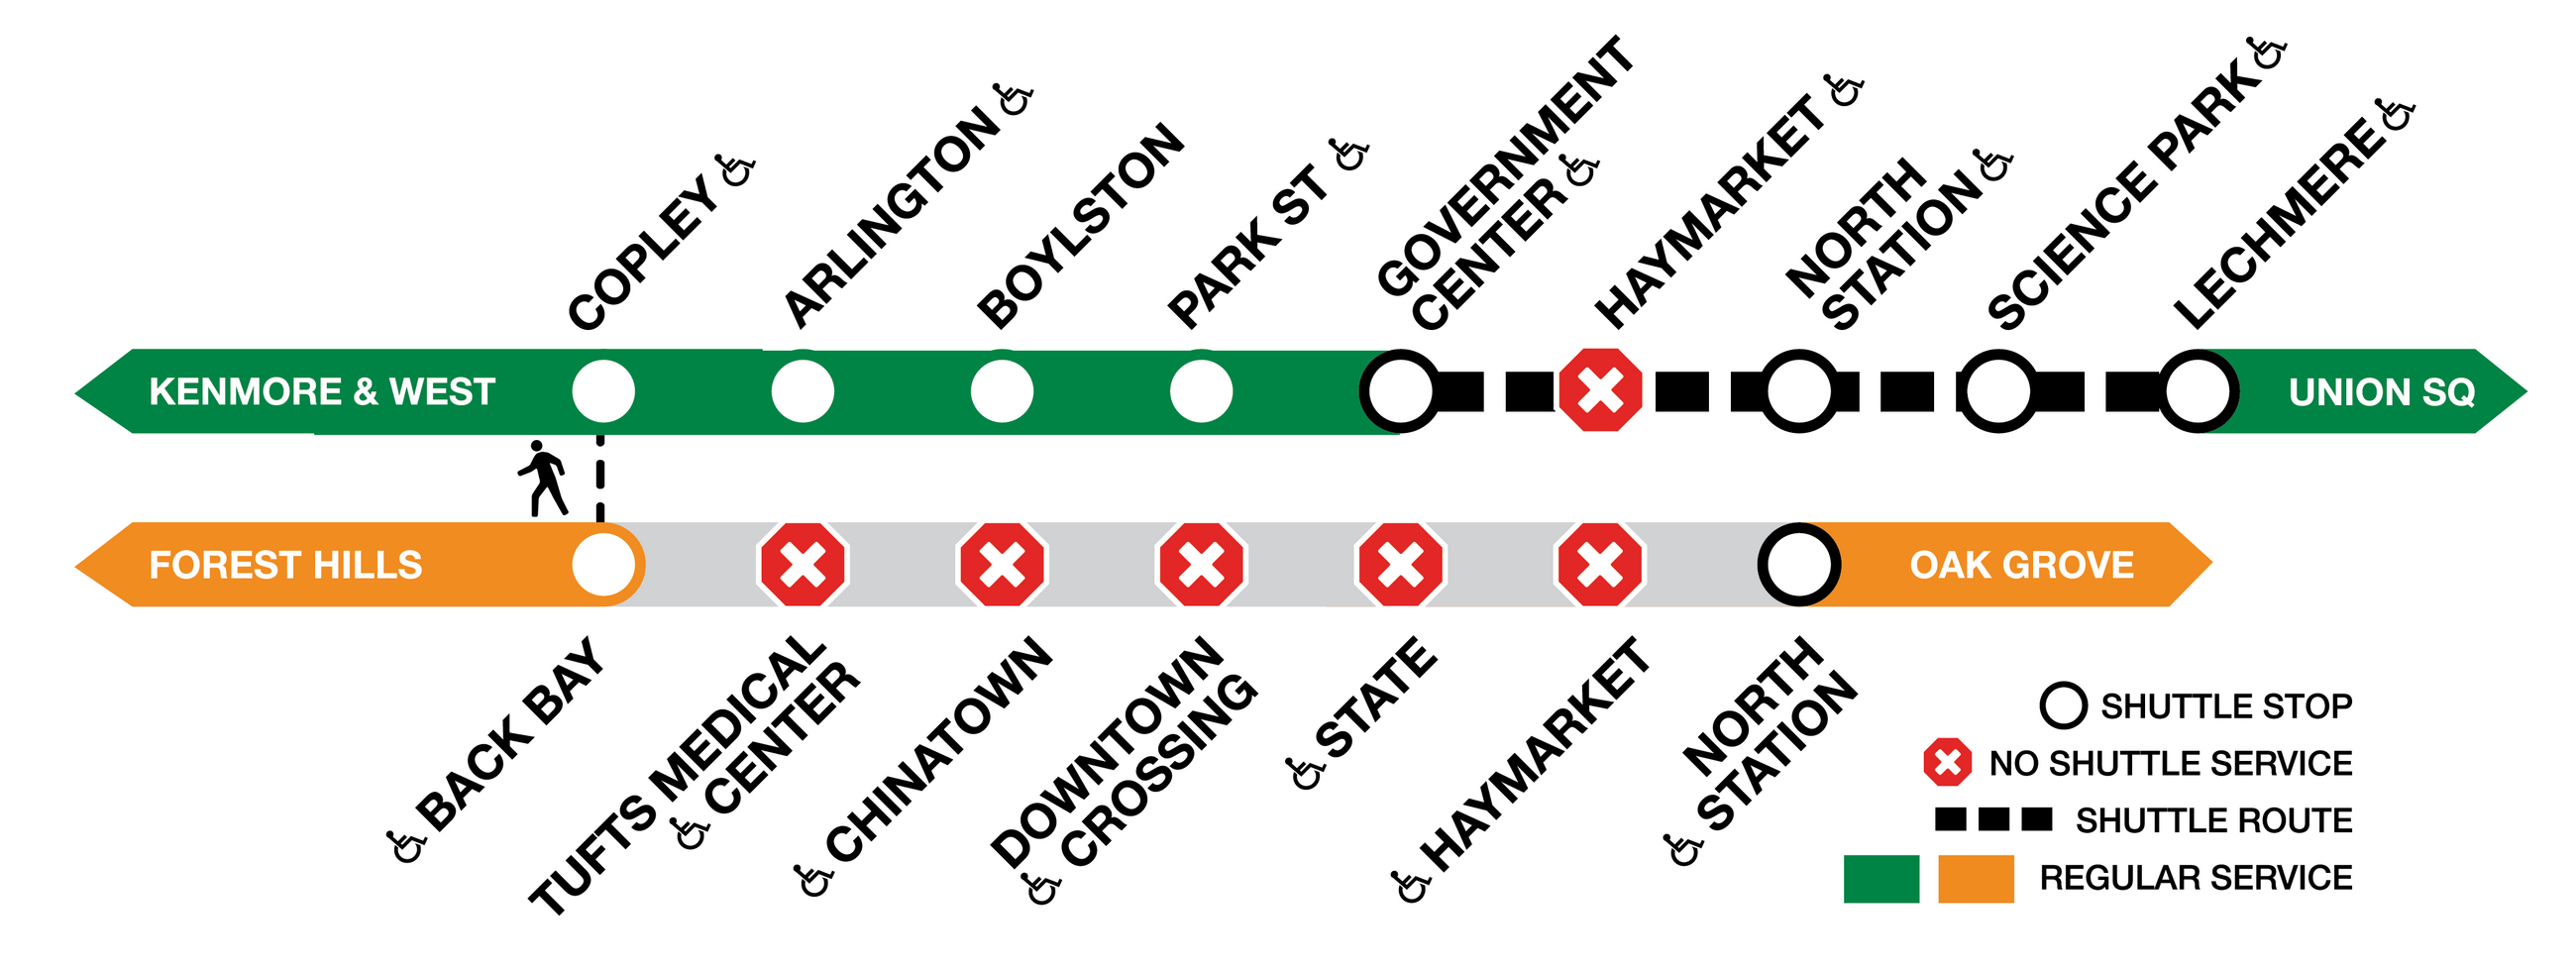 diagram showing service suspension at haymarket on the green and orange lines